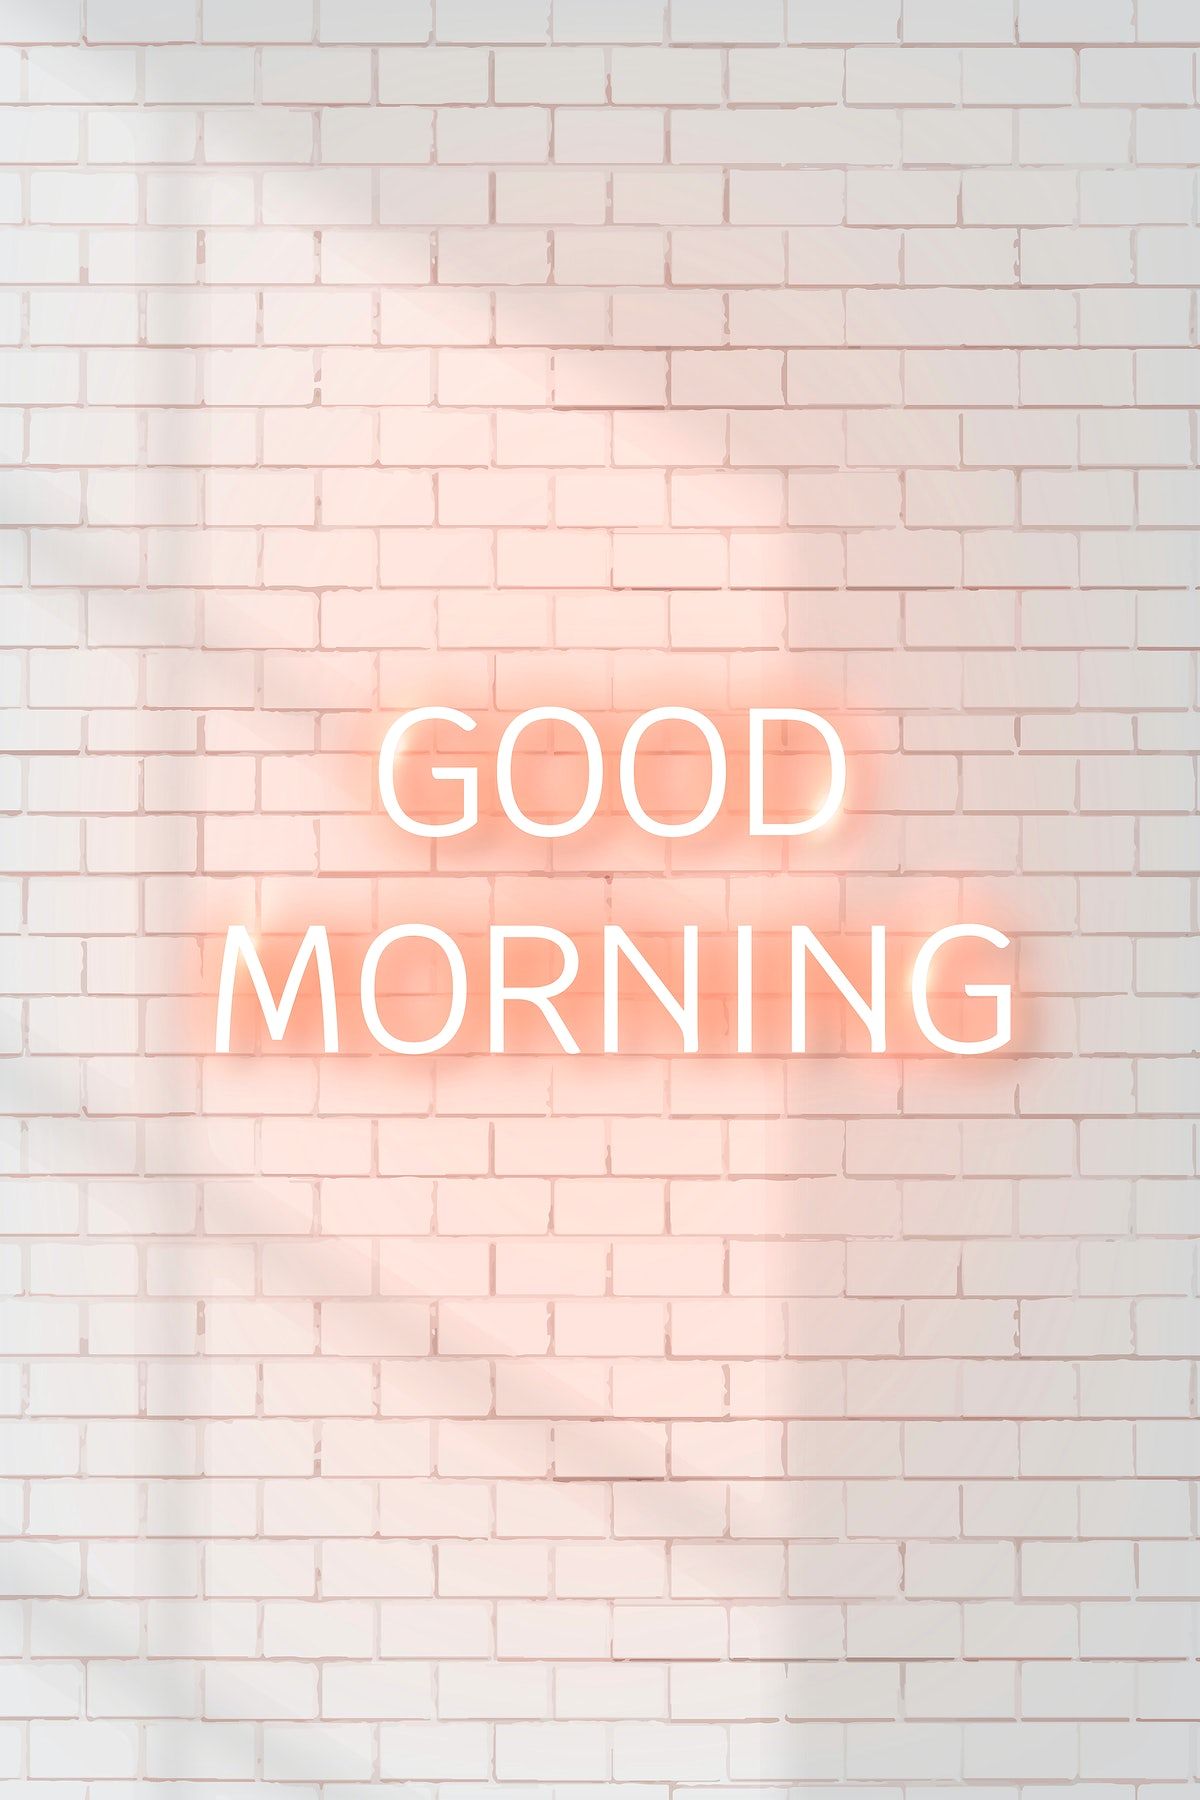 Download premium vector of Neon good morning word on brick wall vector. Morning words, Neon quotes, Neon words